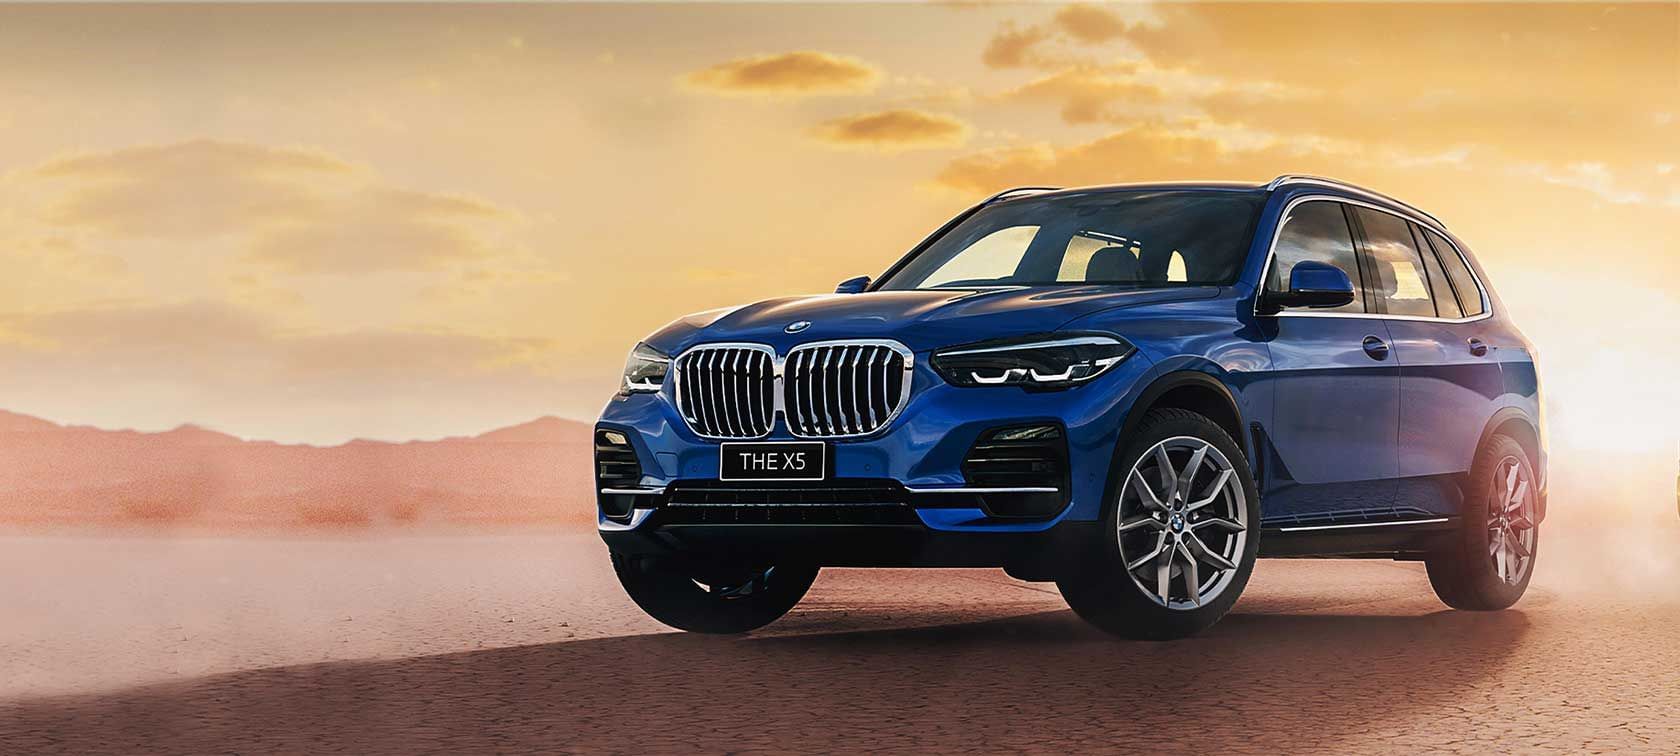 BMW X5 to be launched in April next year